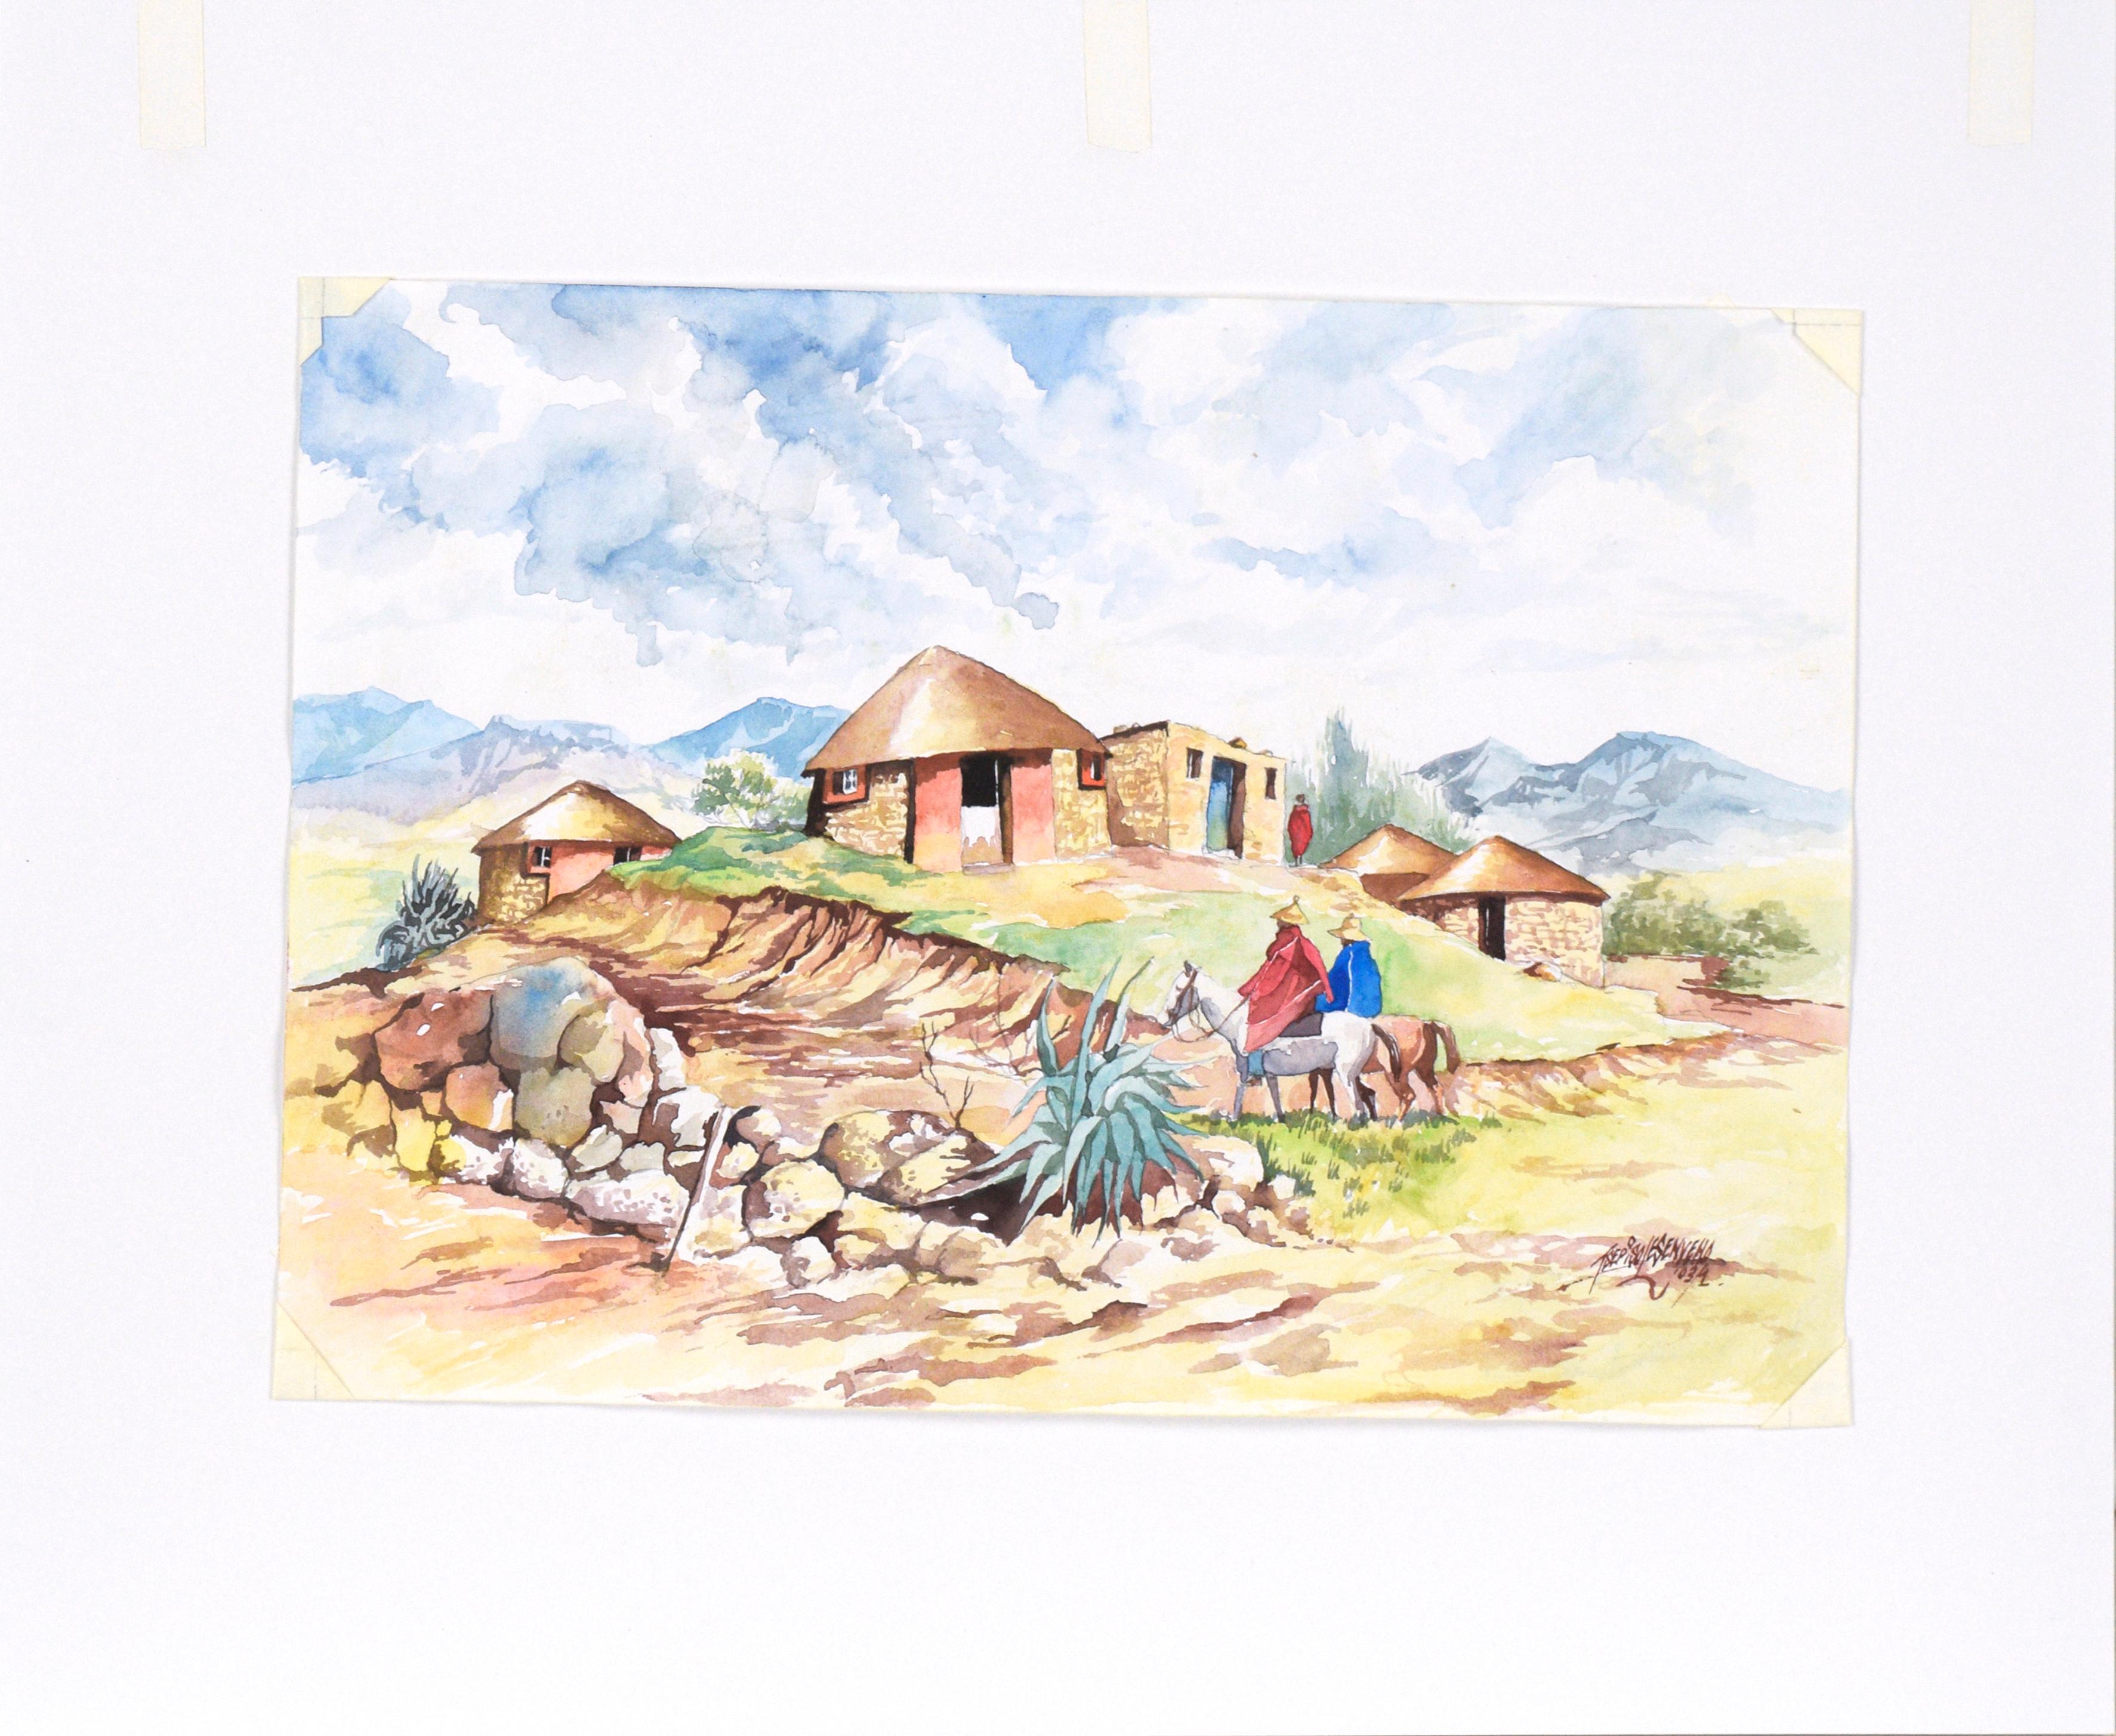 Highly detailed village scene by notable South African artist Tsepiso Lesenyeho (b. 1968). A cluster of houses sit atop a hill, against a dramatic backdrop of mountains and clouds. In the midground, two figures are riding donkeys towards the